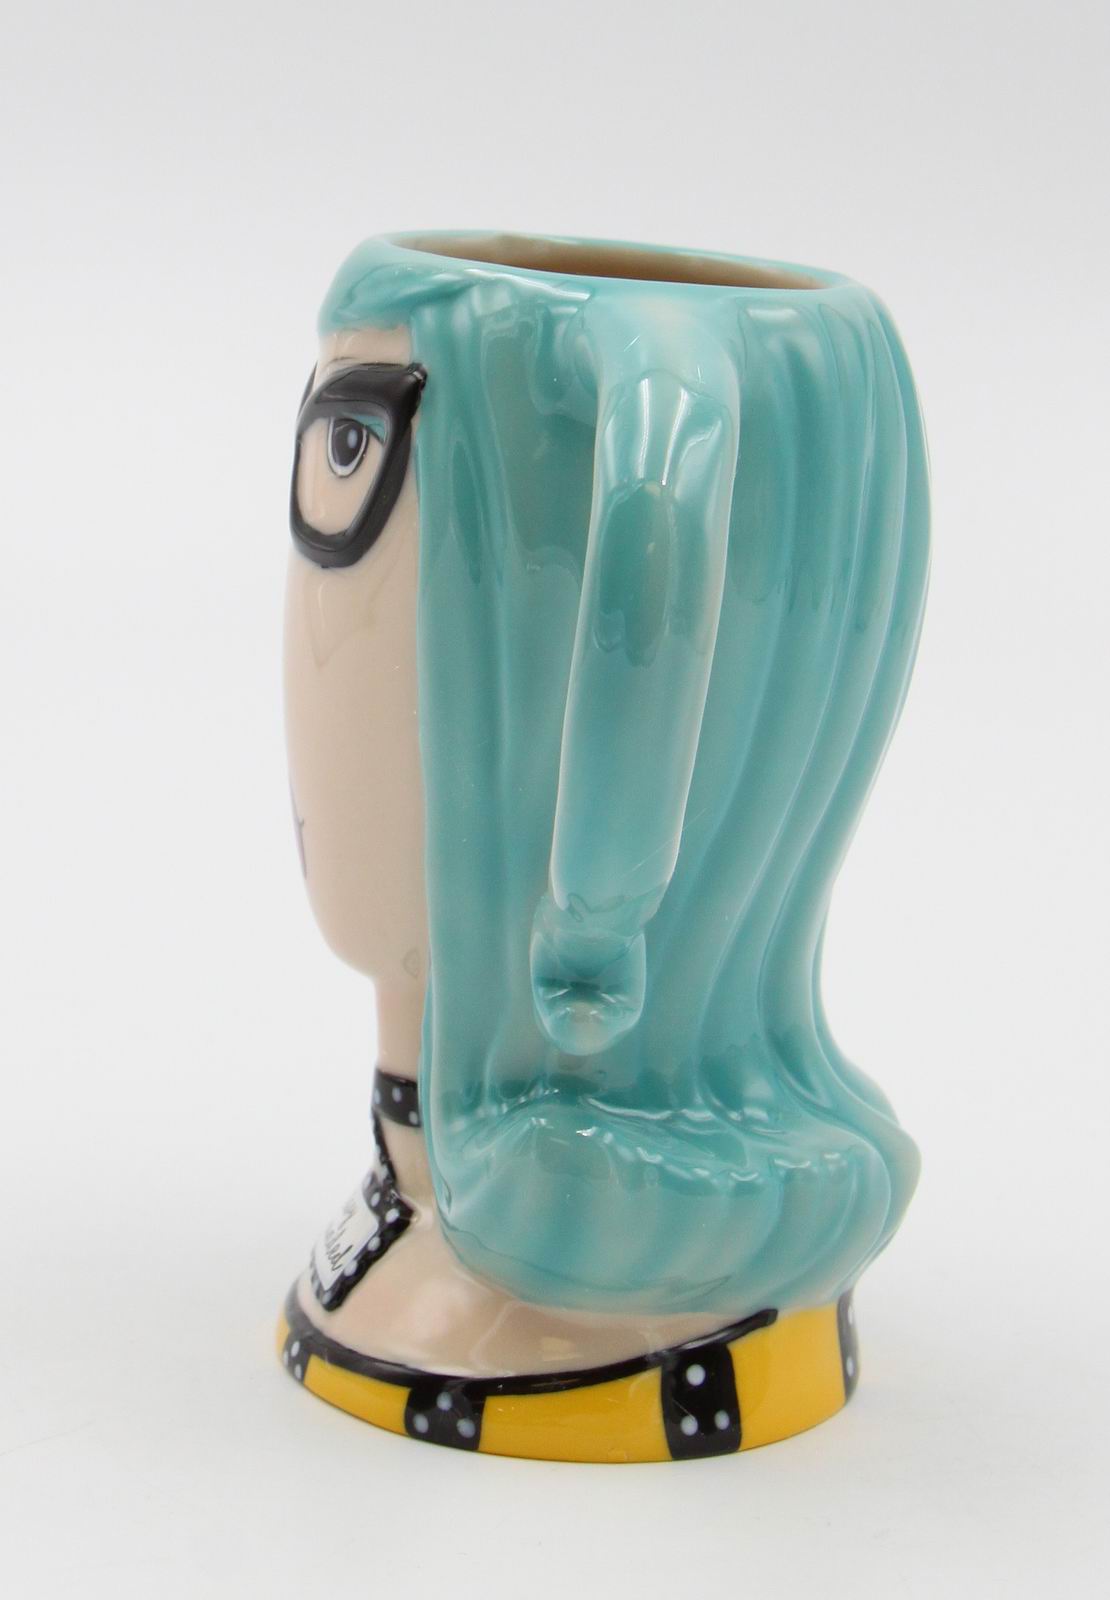 Ceramic Blue Hair Lady Cup, Home Décor, Gift for Her, Mom, Friend, or Coworker, Kitchen Décor